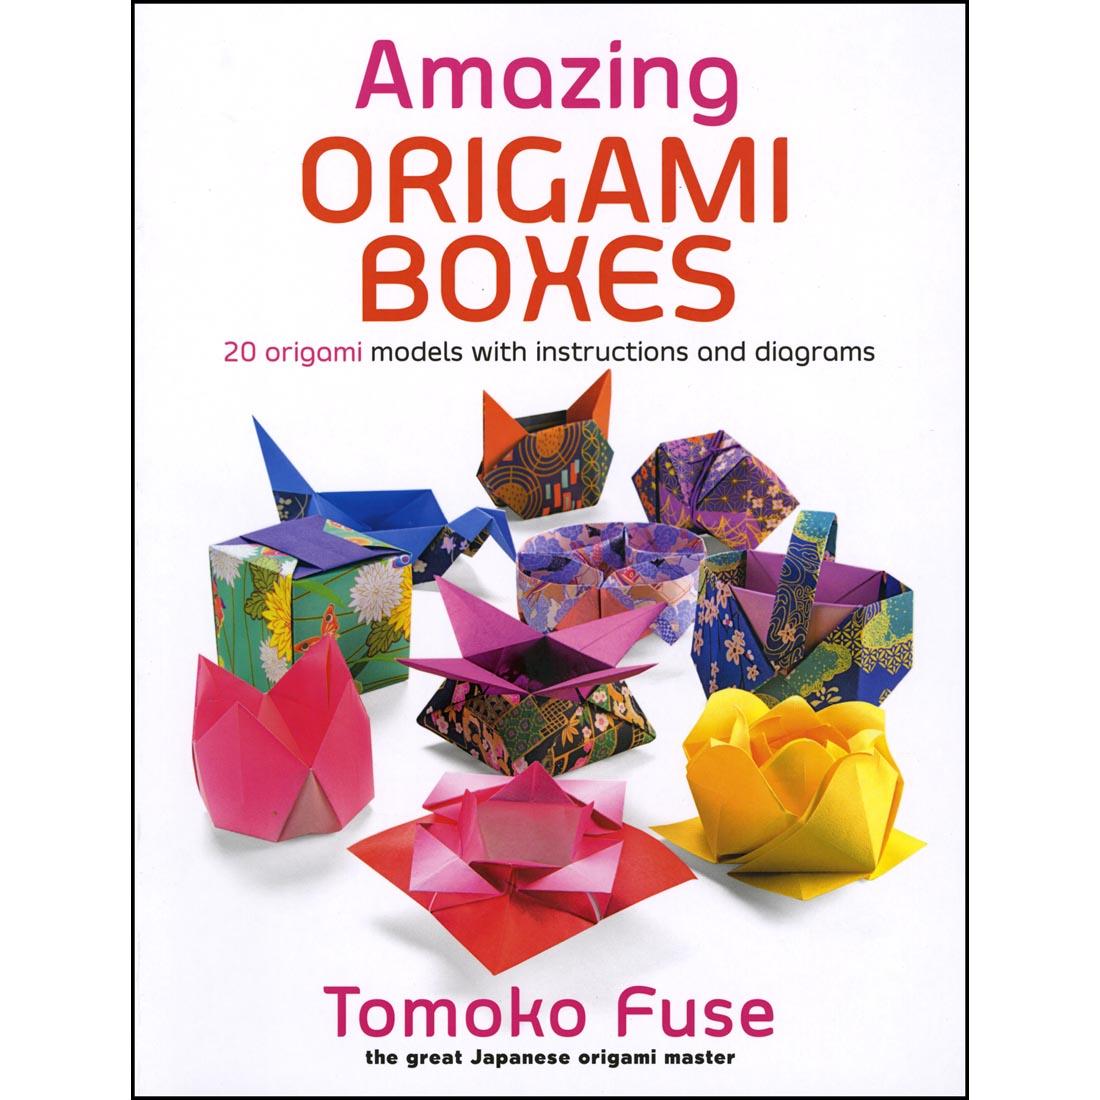 Amazing Origami Boxes 20 Origami Models with Instructions and Diagrams